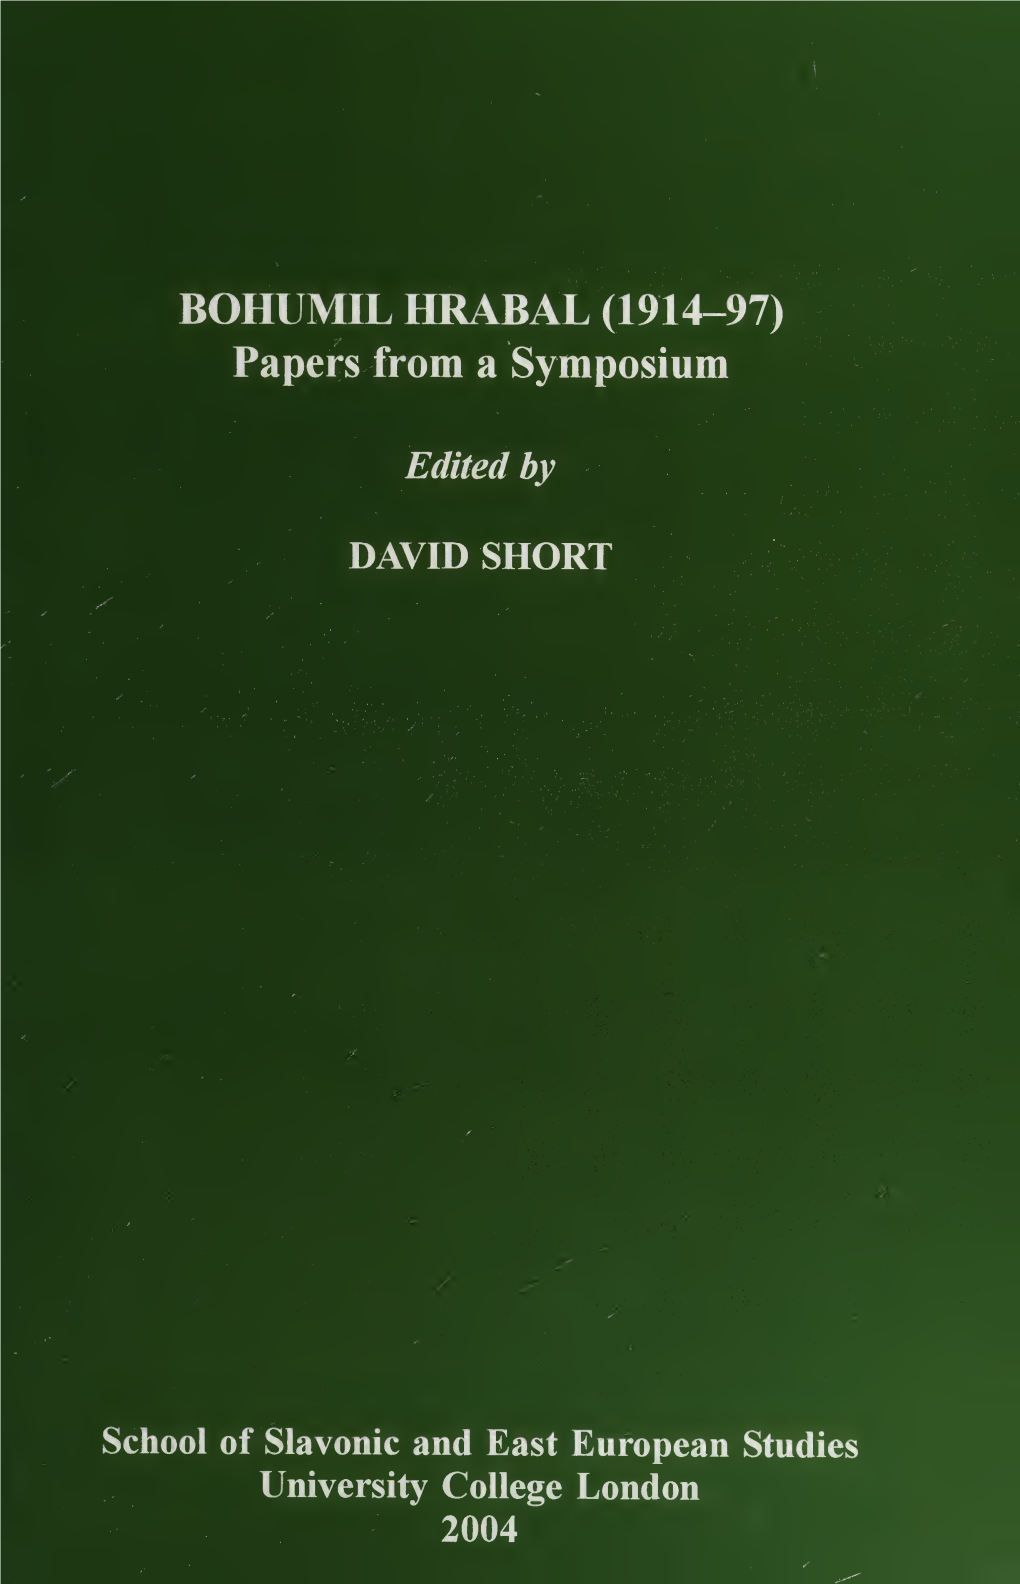 BOHUMIL HRABAL (1914-97) Papers from a Symposium